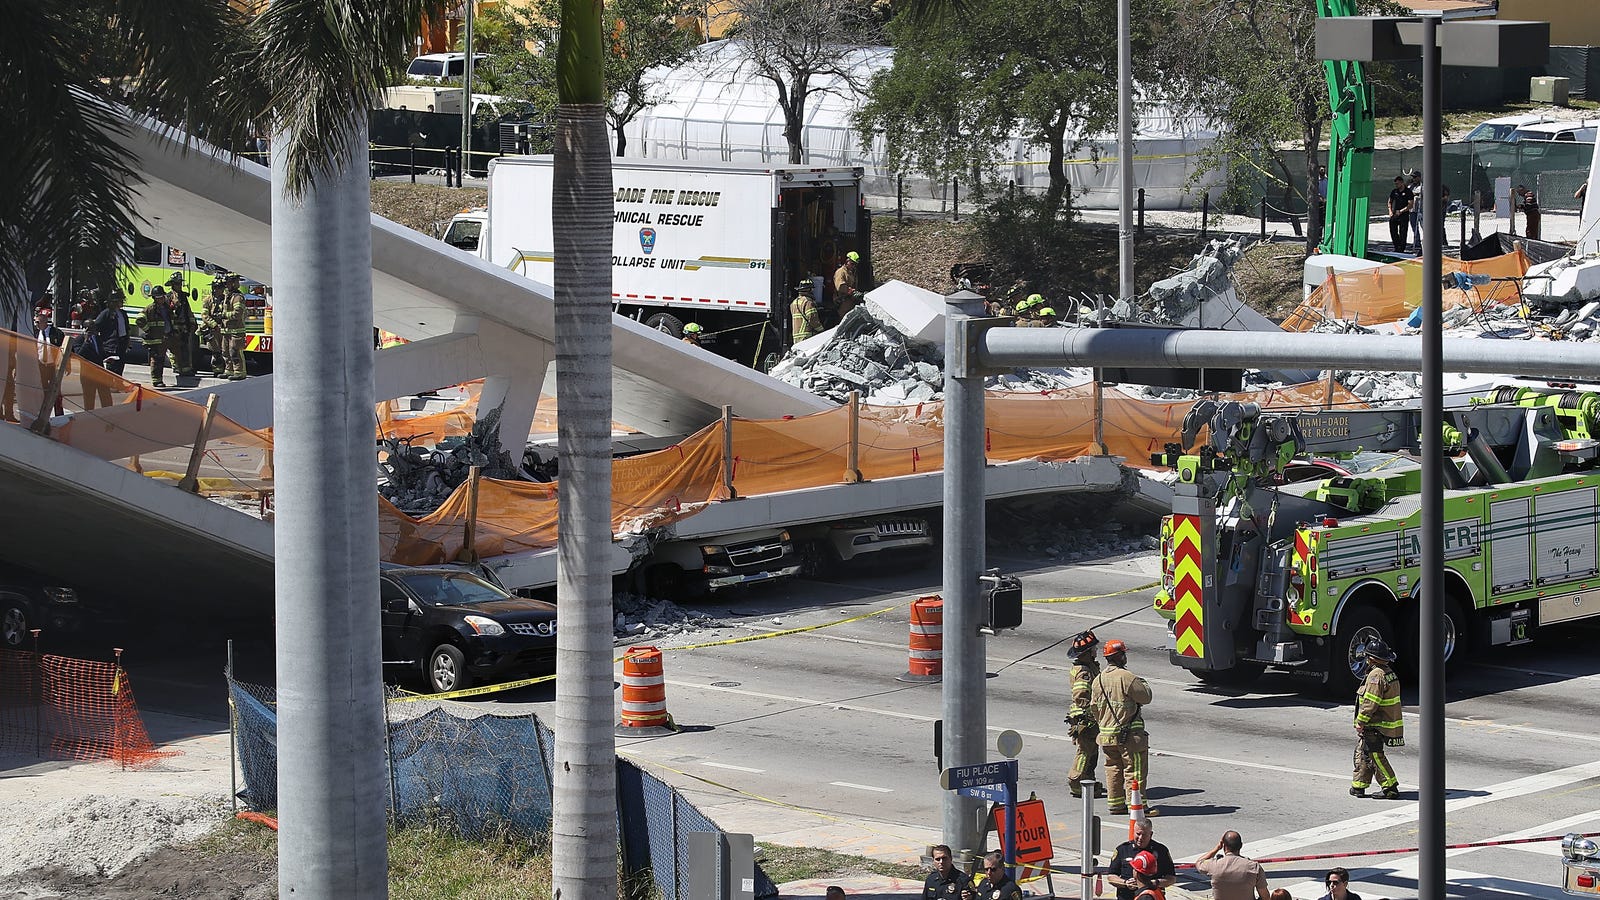 Florida Pedestrian Bridge Constructed Barely A Week Ago Collapses, Killing Multiple People